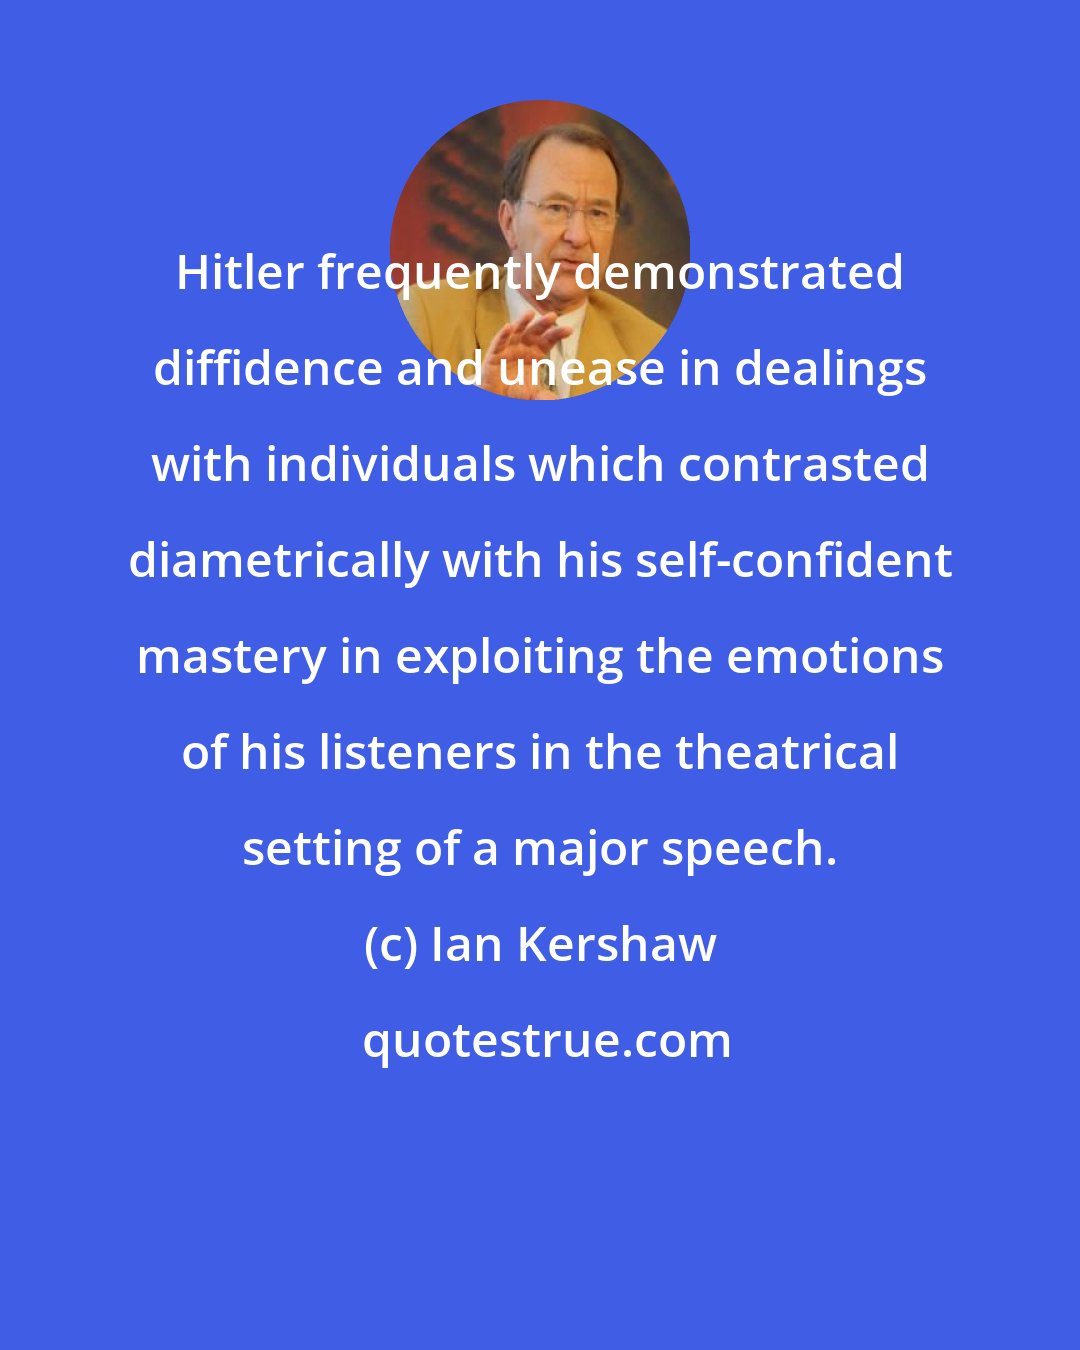 Ian Kershaw: Hitler frequently demonstrated diffidence and unease in dealings with individuals which contrasted diametrically with his self-confident mastery in exploiting the emotions of his listeners in the theatrical setting of a major speech.